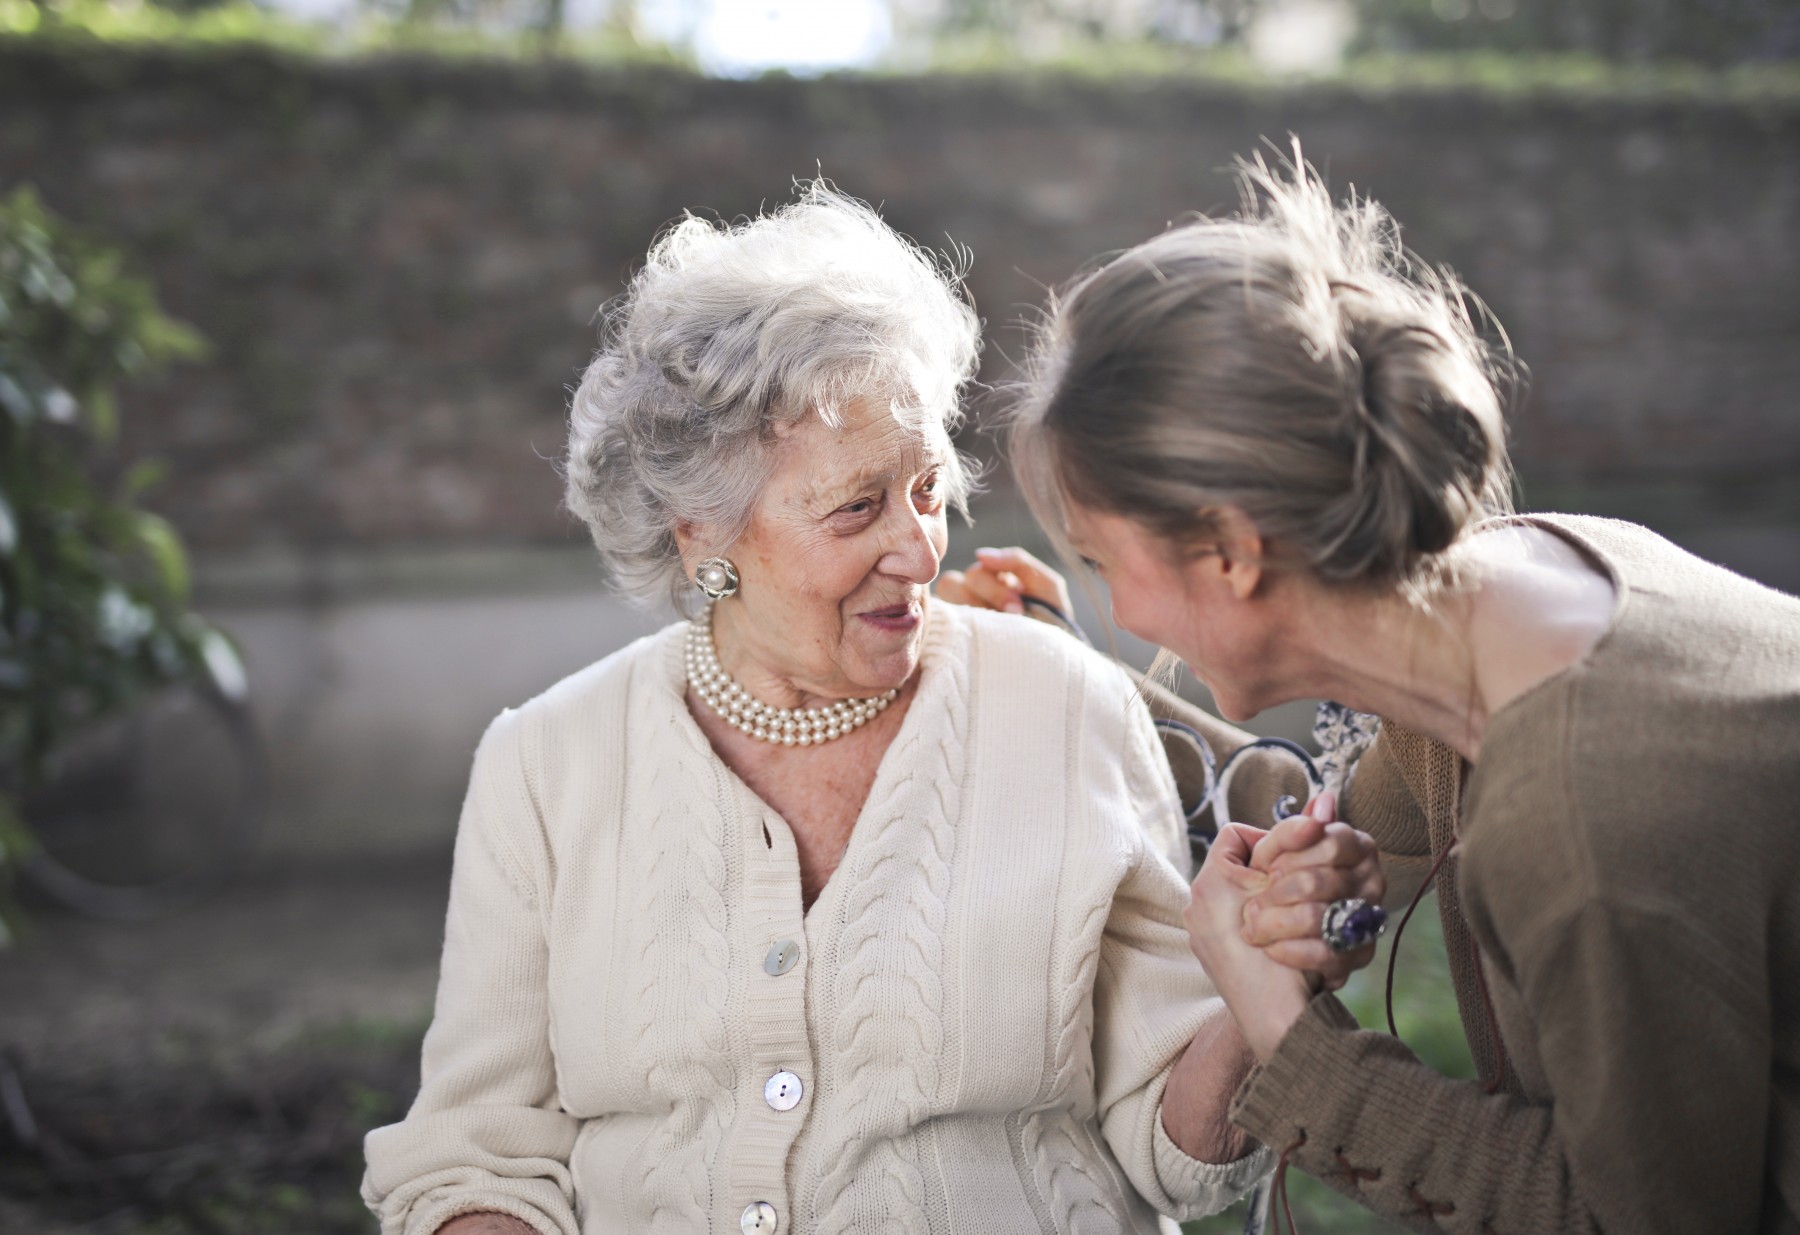 Caring for a Loved One: How to Lift & Handle Safely and Properly